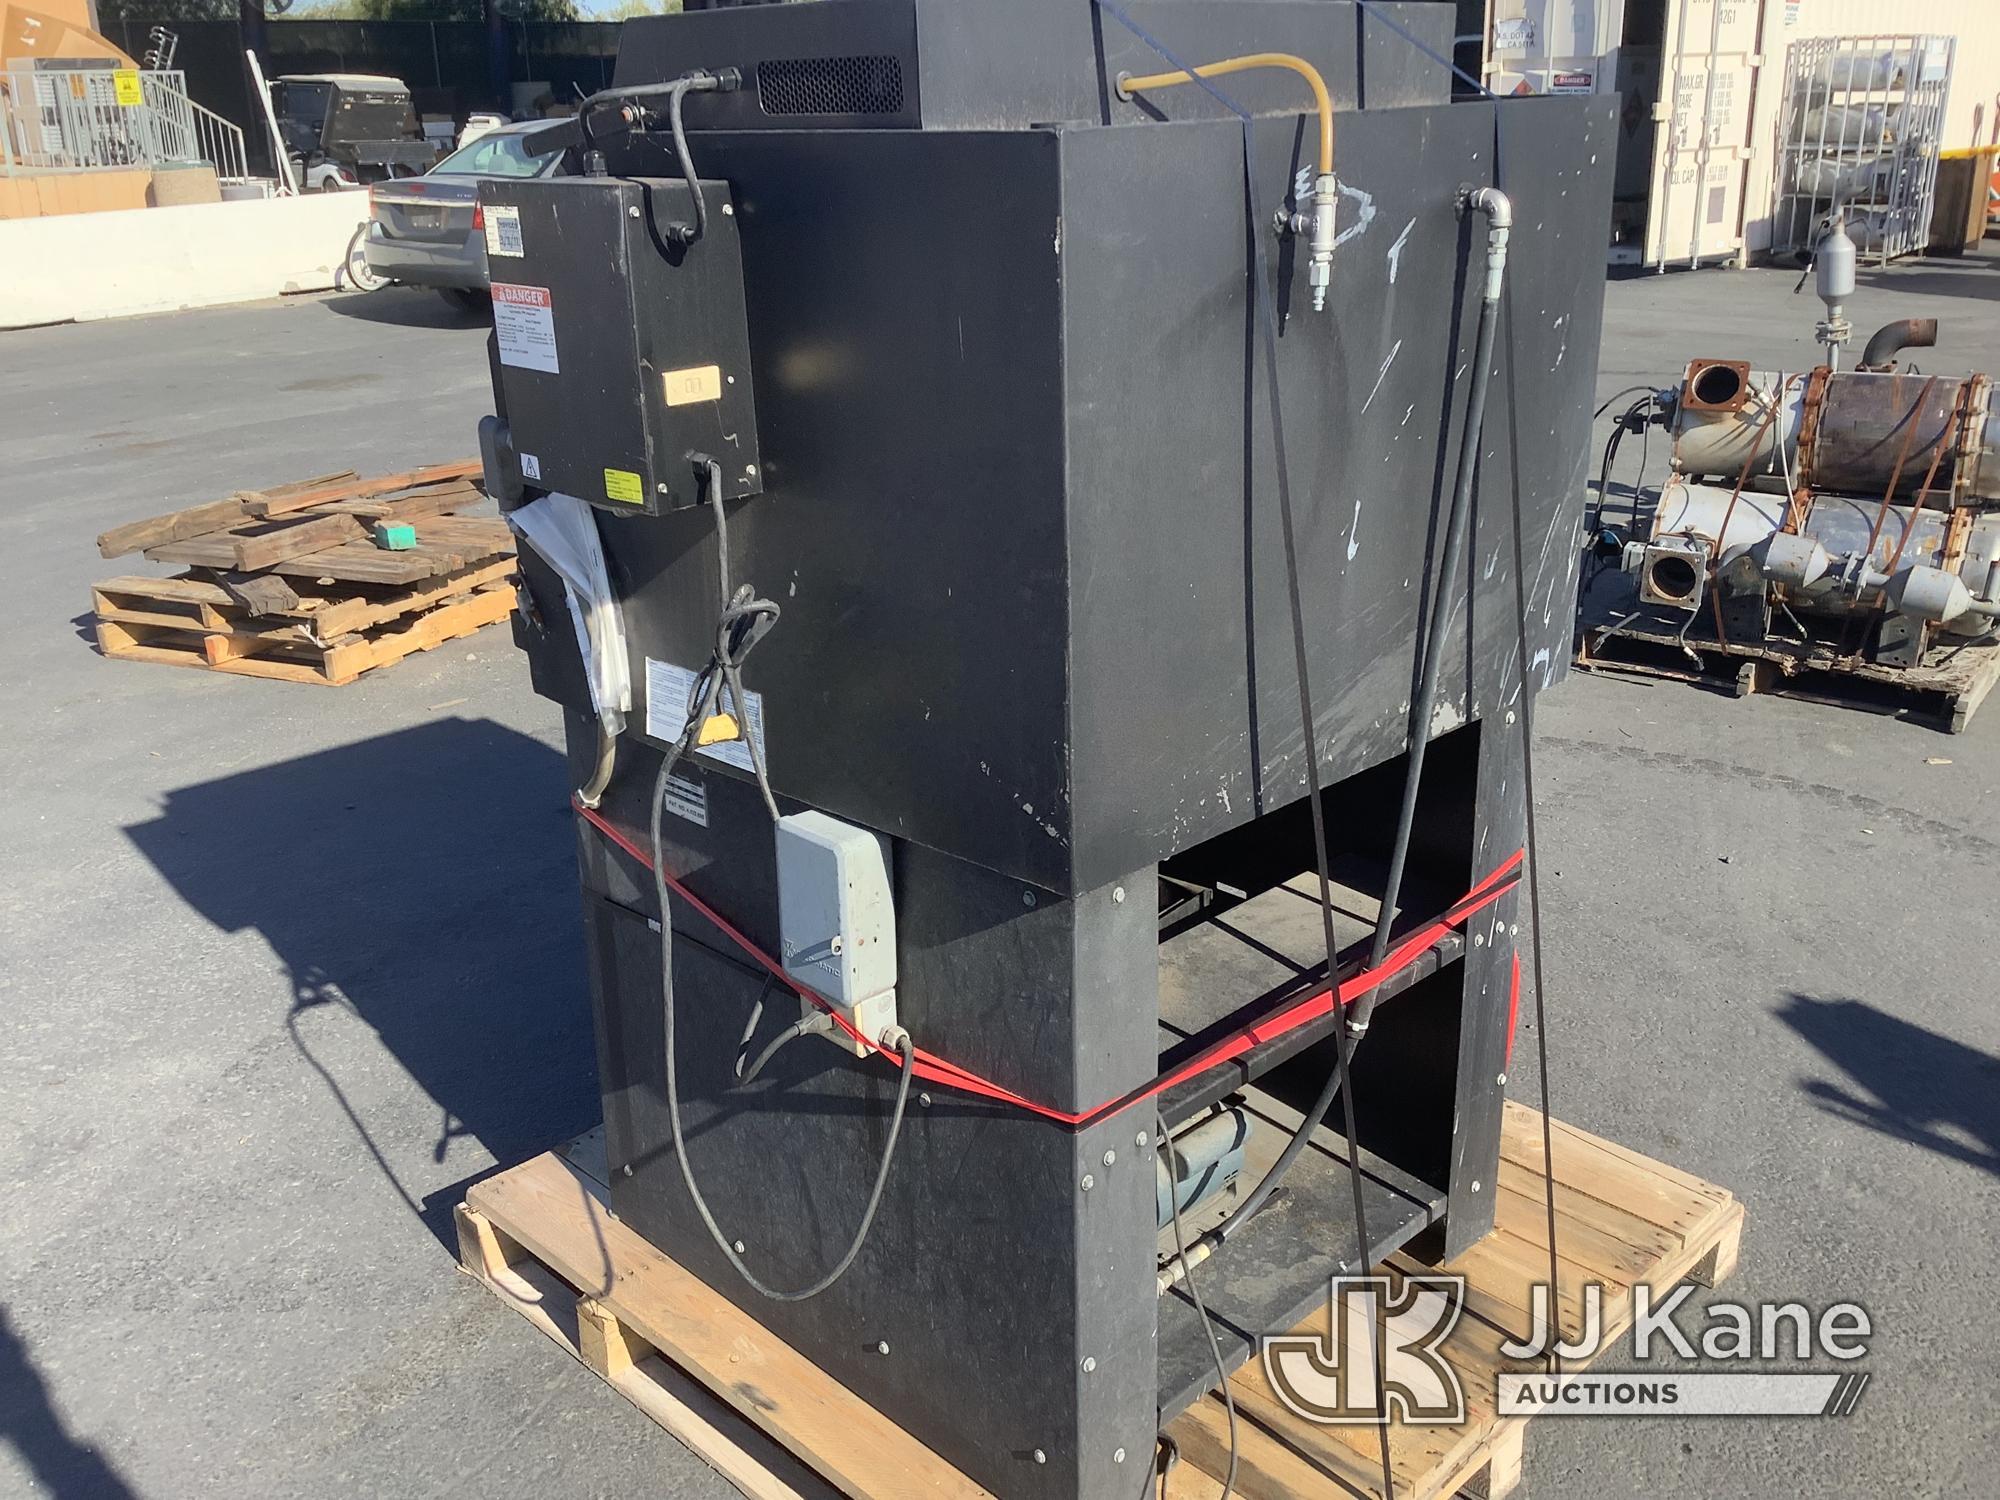 (Jurupa Valley, CA) 1 Graymills Parts Washer (Used) NOTE: This unit is being sold AS IS/WHERE IS via